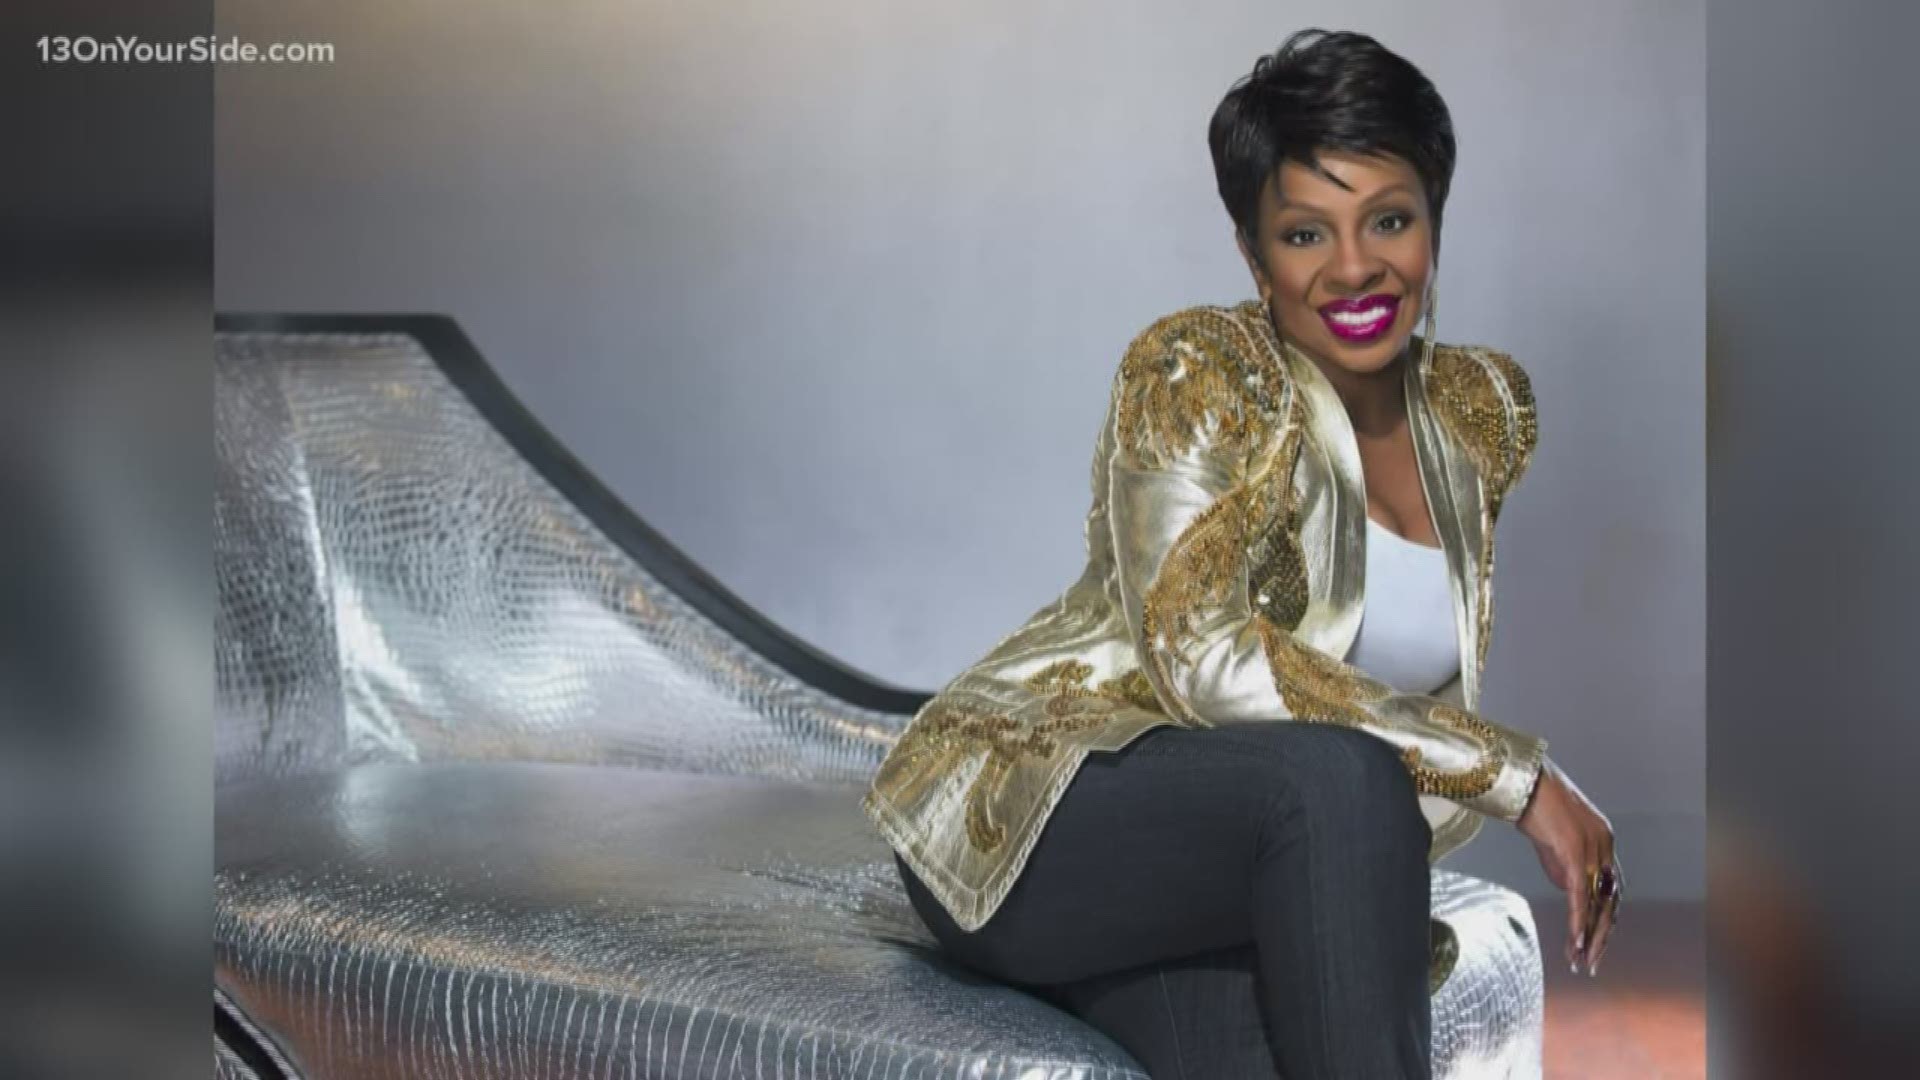 Tickets for the shows at Tulip Time, including legendary Gladys Knight, go on sale Thursday, Nov. 7. Get yours now!